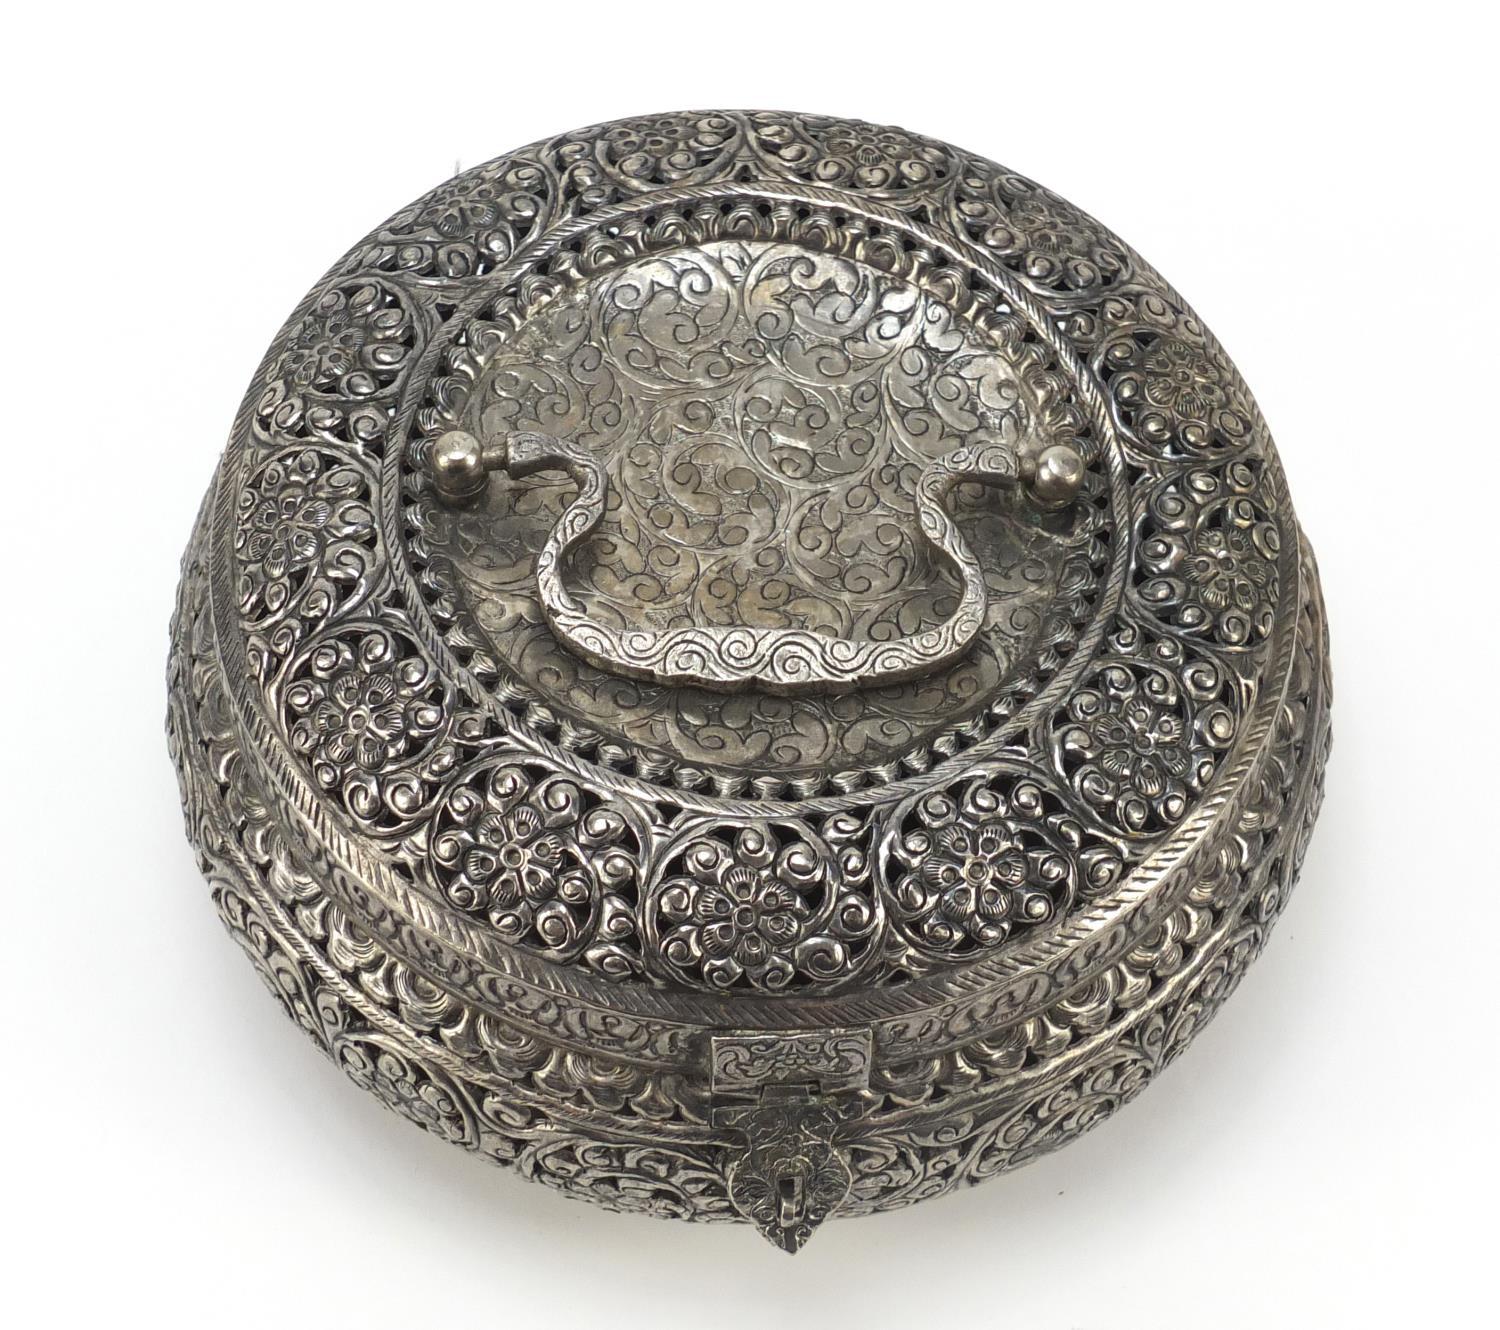 Burmese silver coloured metal pierced container embossed with flowers, 21cm in diameter, 820g : - Image 6 of 7